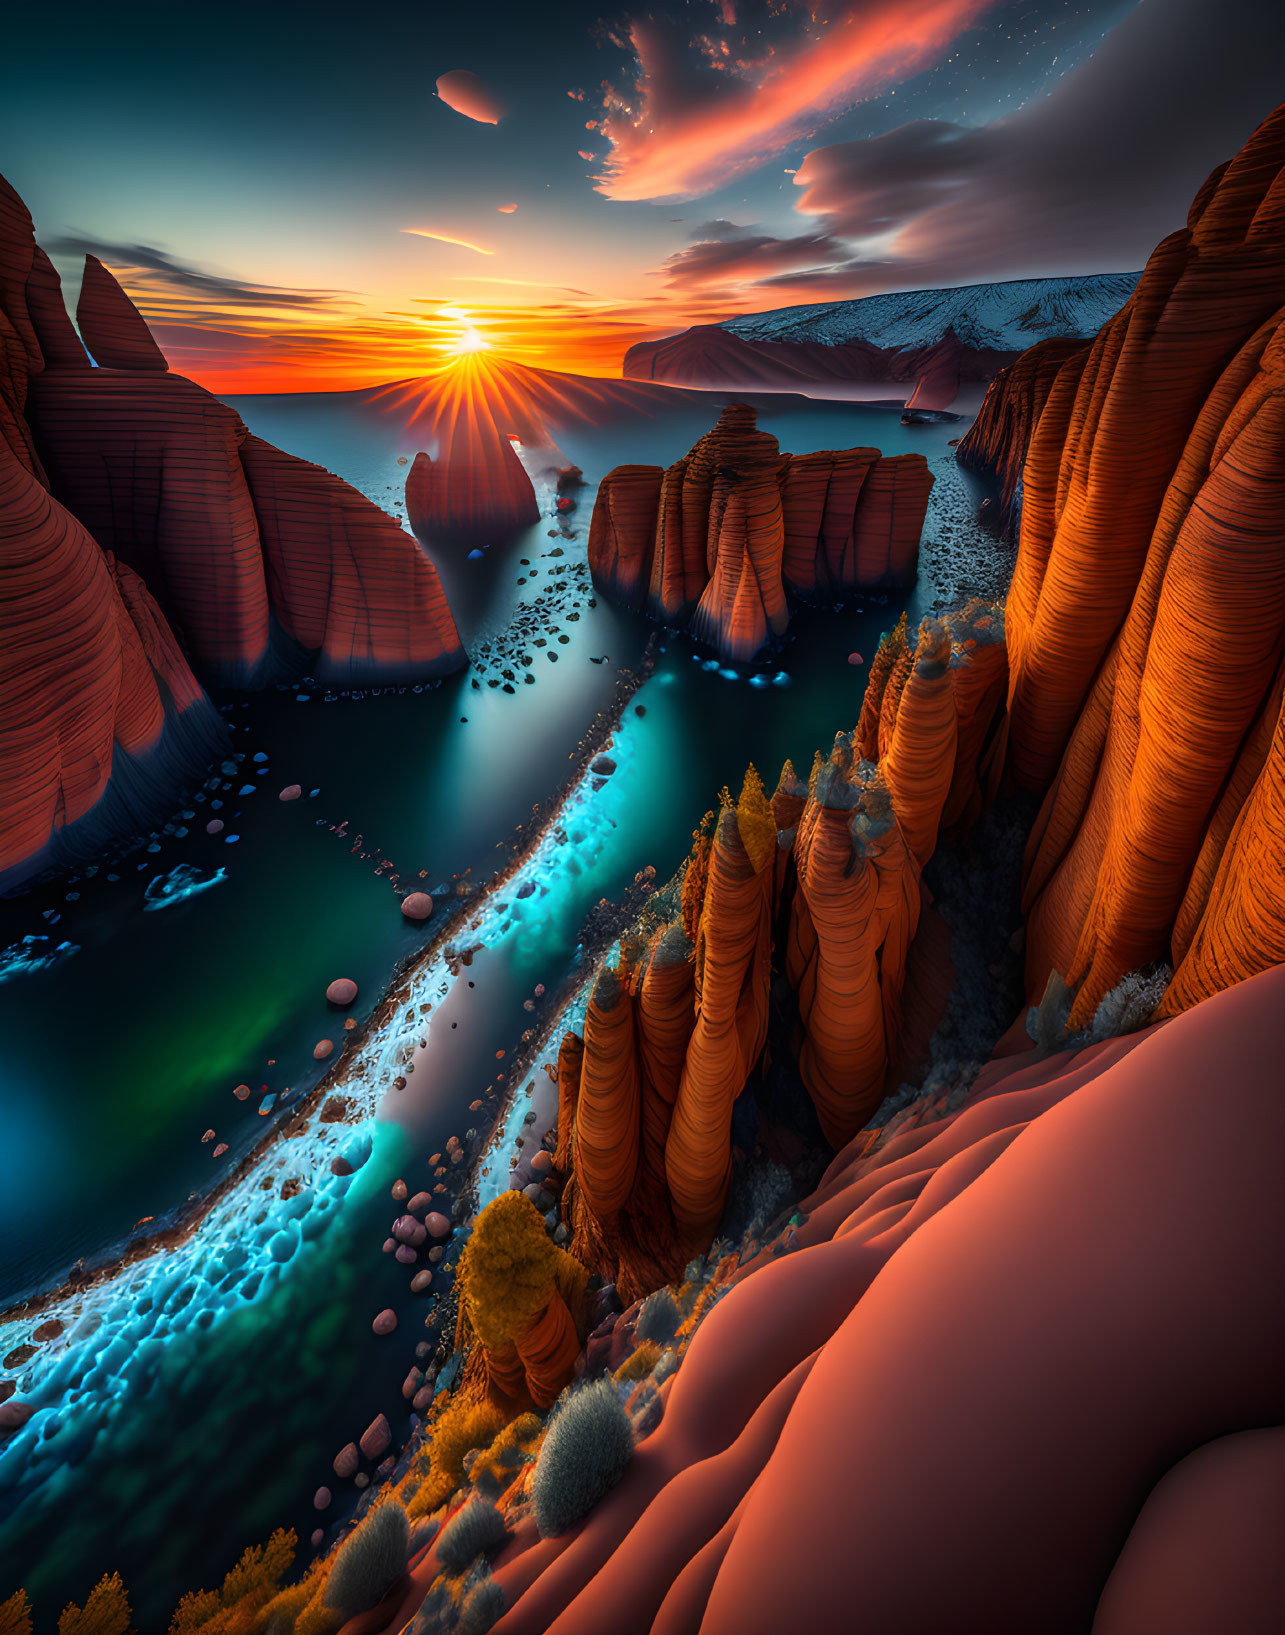 Vibrant sunset over fantastical landscape with rock formations and blue waterway